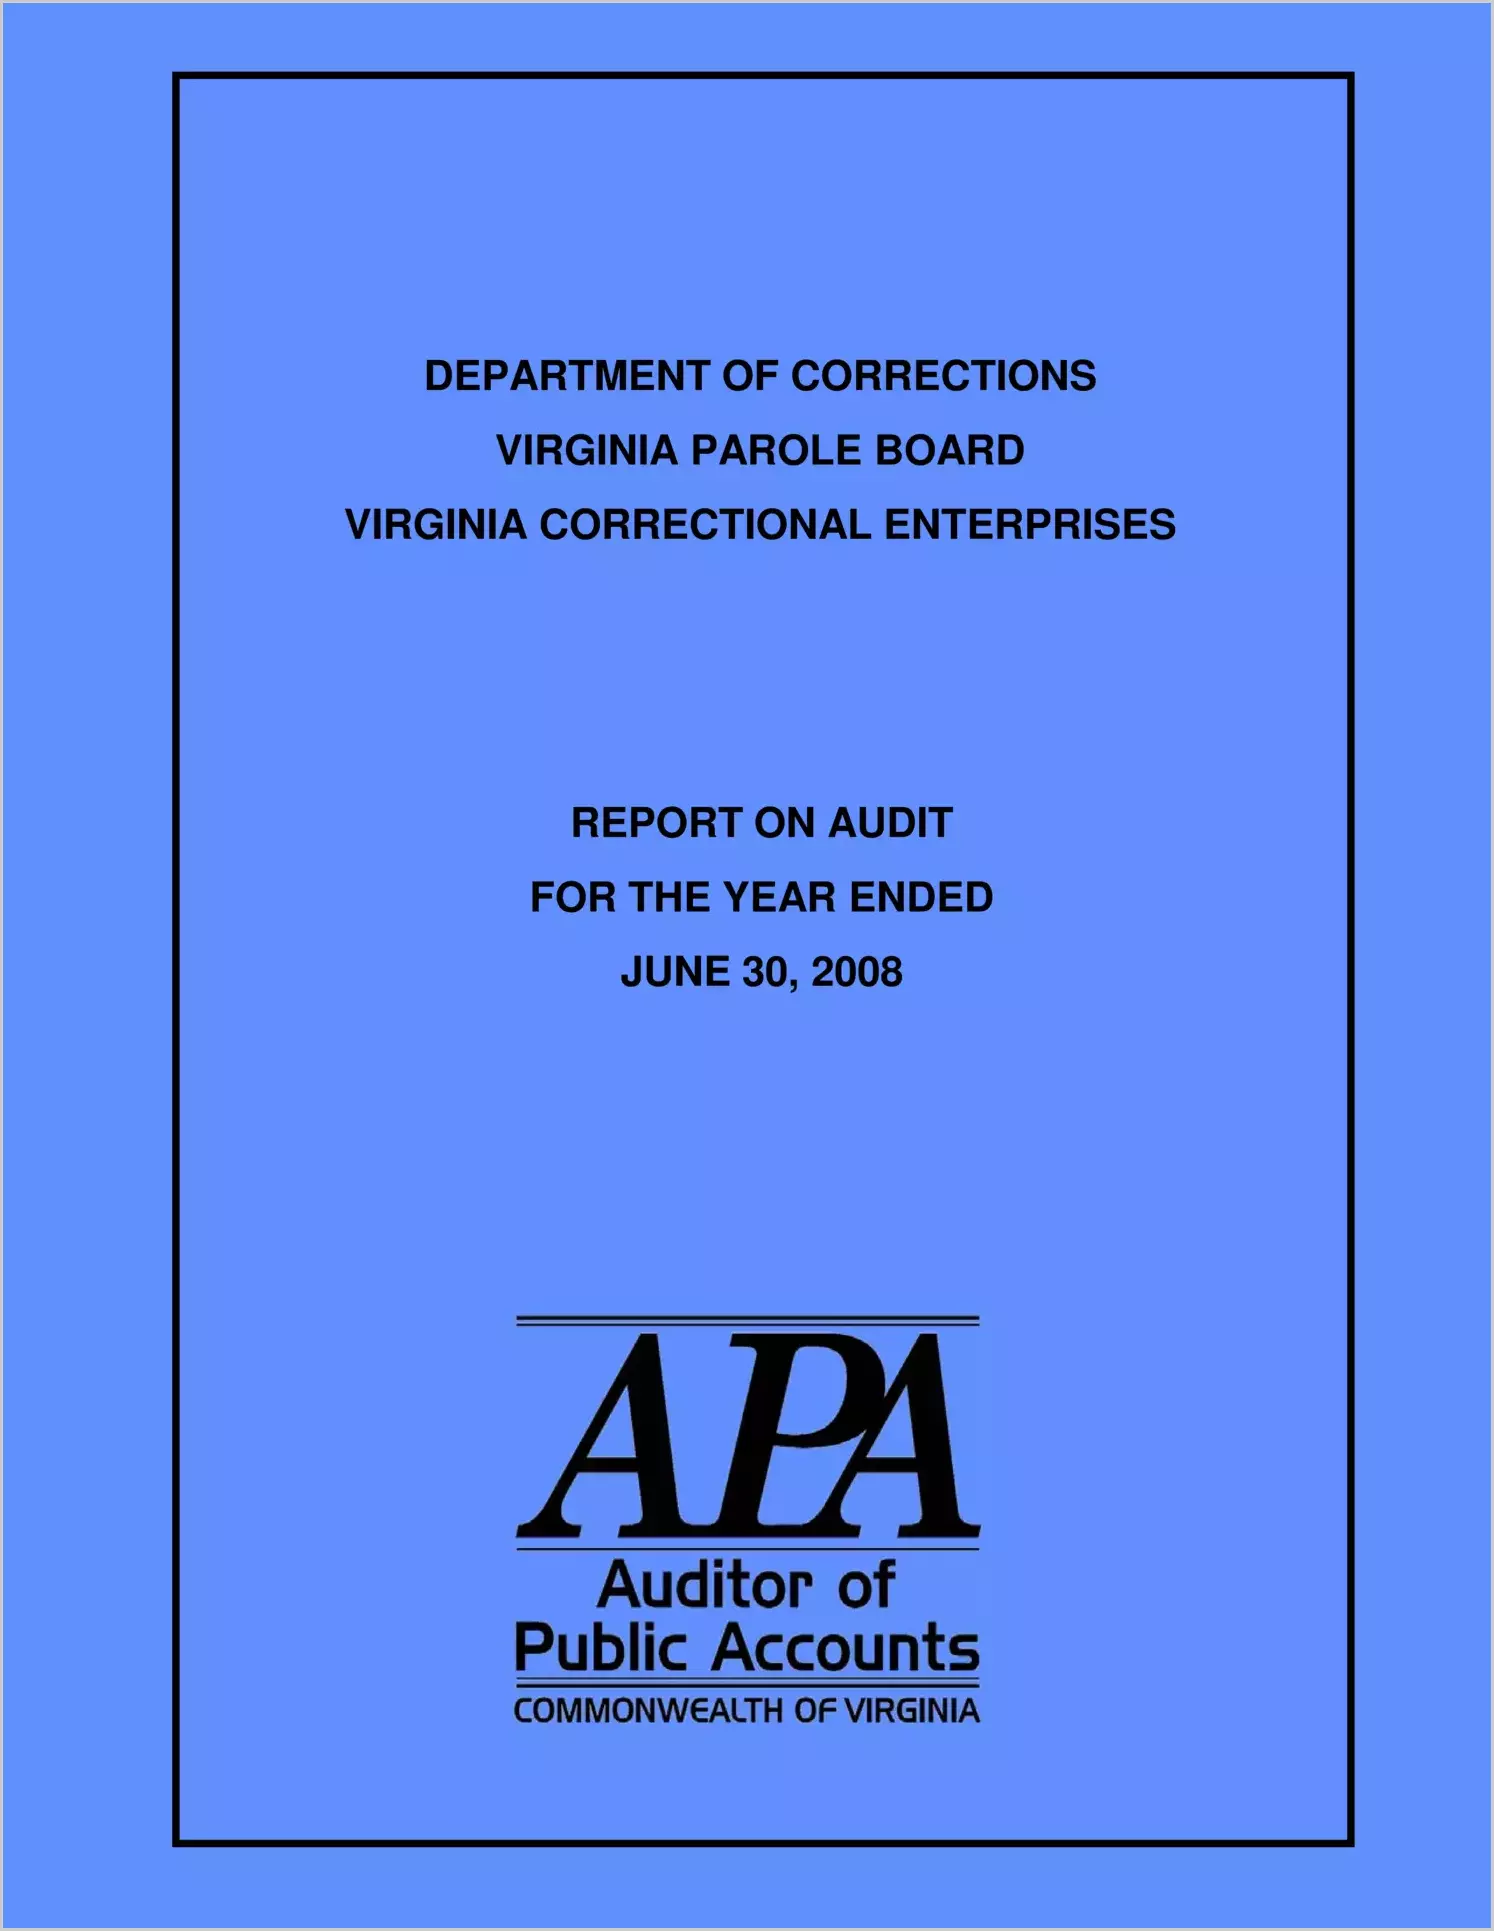 Department of Corrections and Virginia Parole Board report on audit for the year ended June 30, 2008.